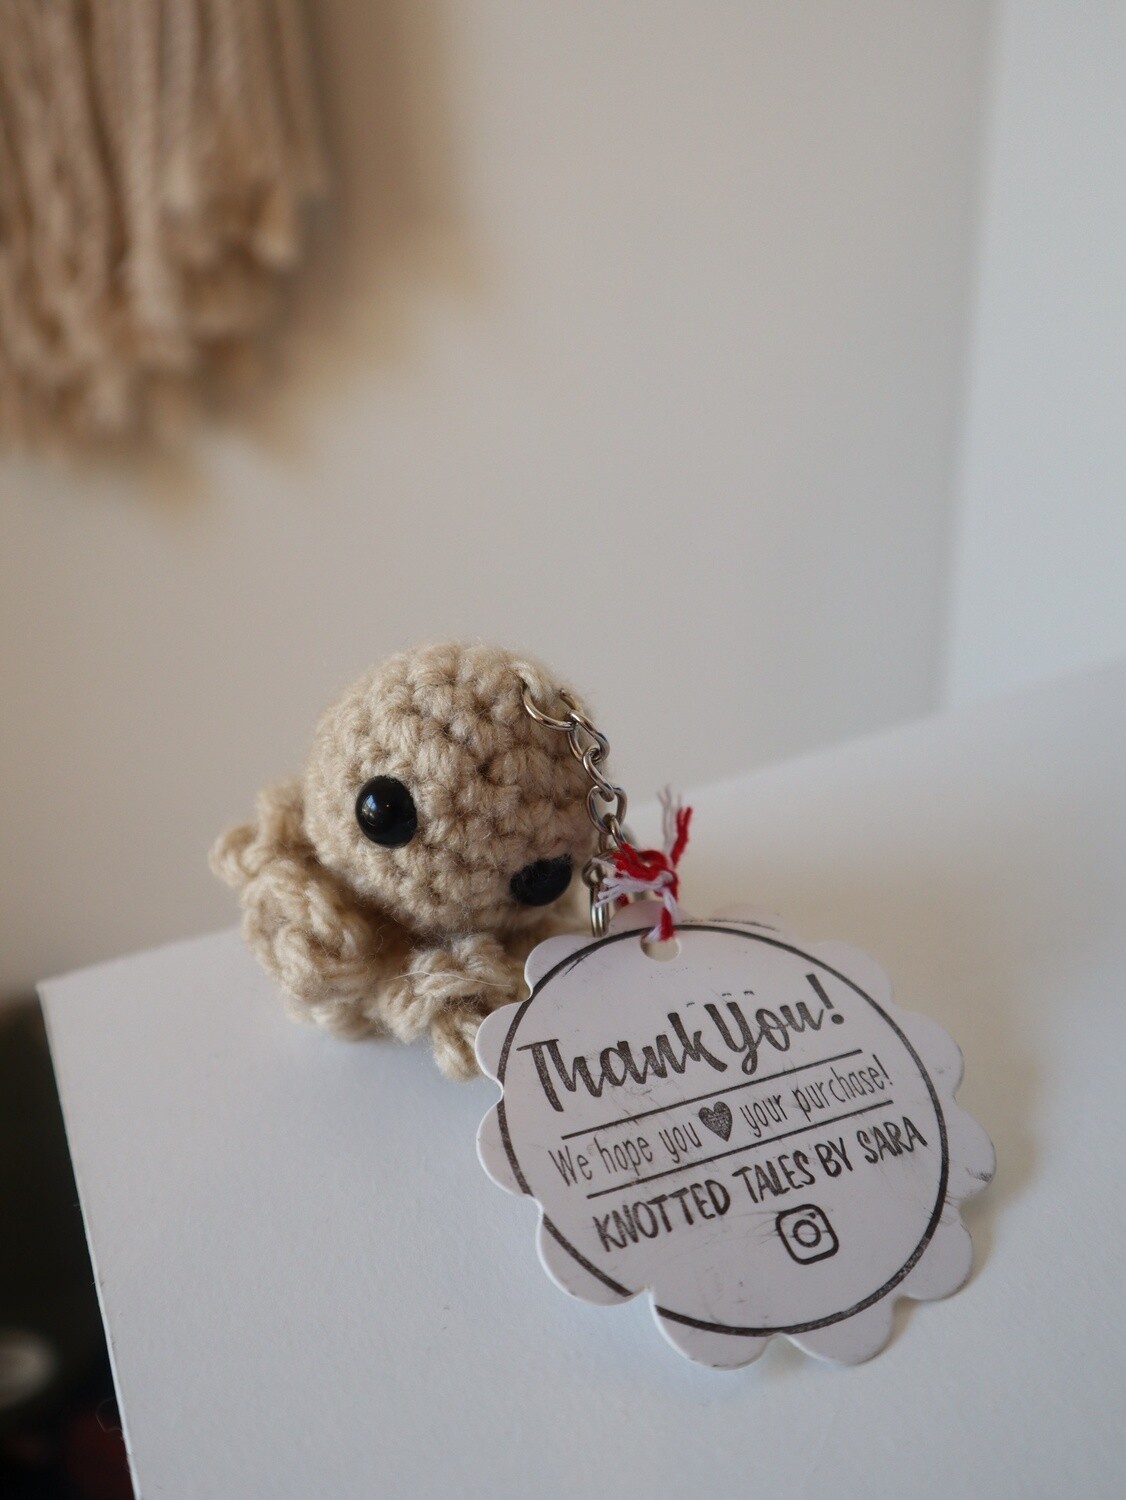 Crocheted Octopus Keychains